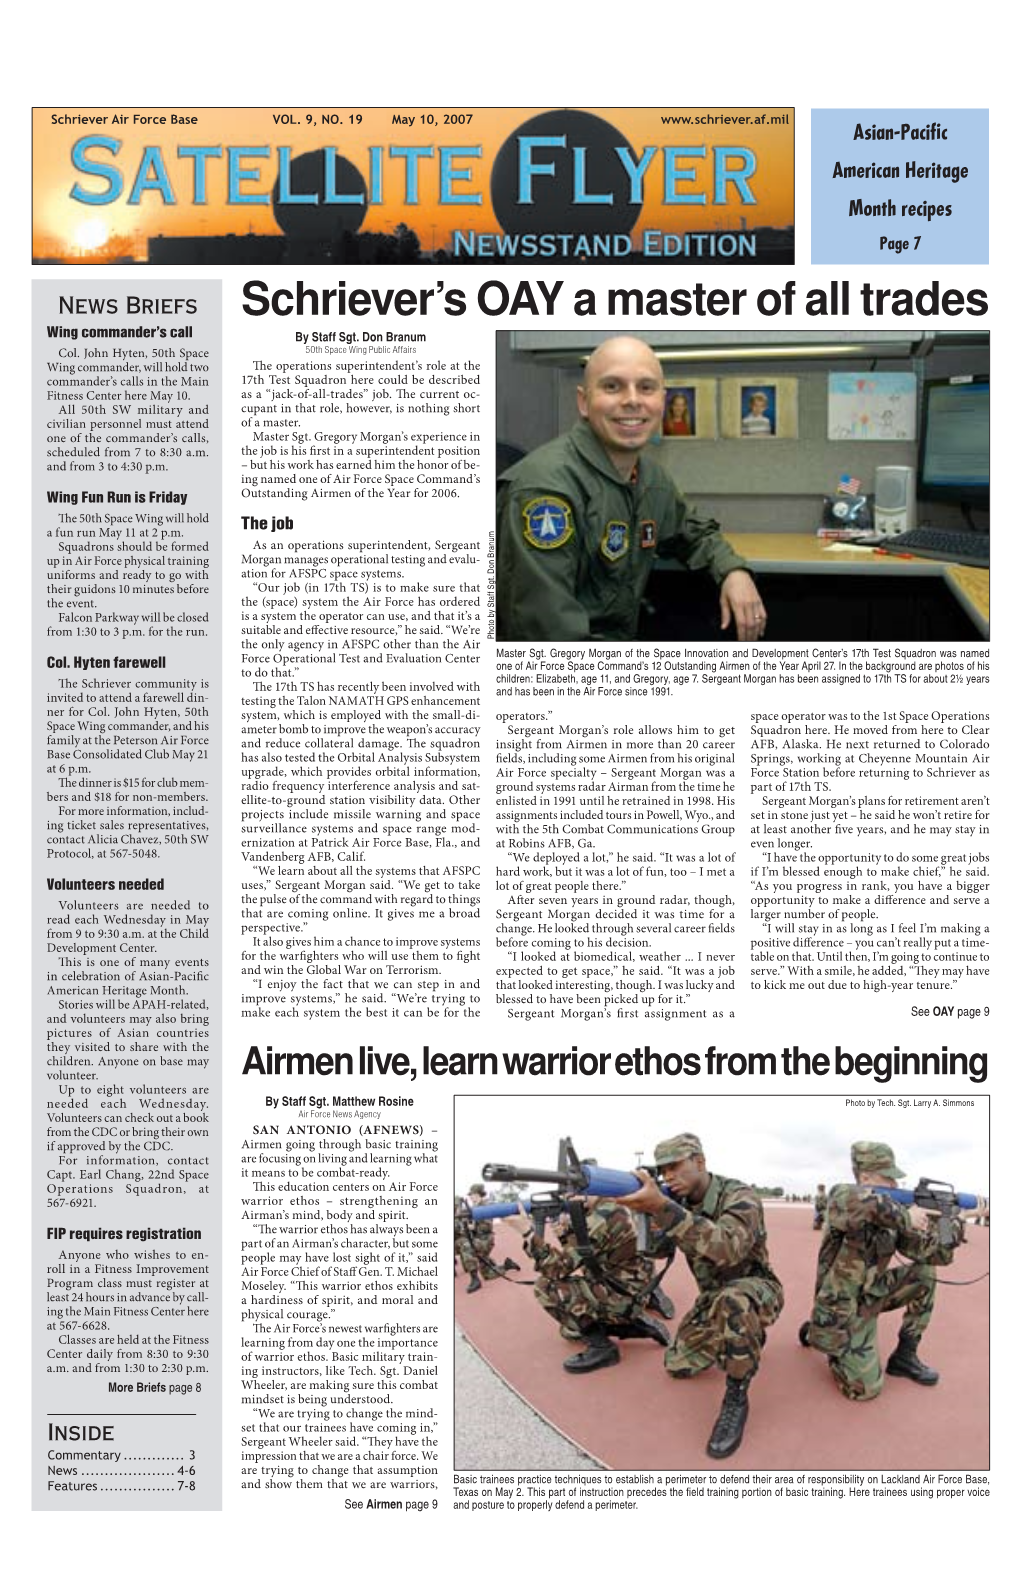 Schriever's OAY a Master of All Trades